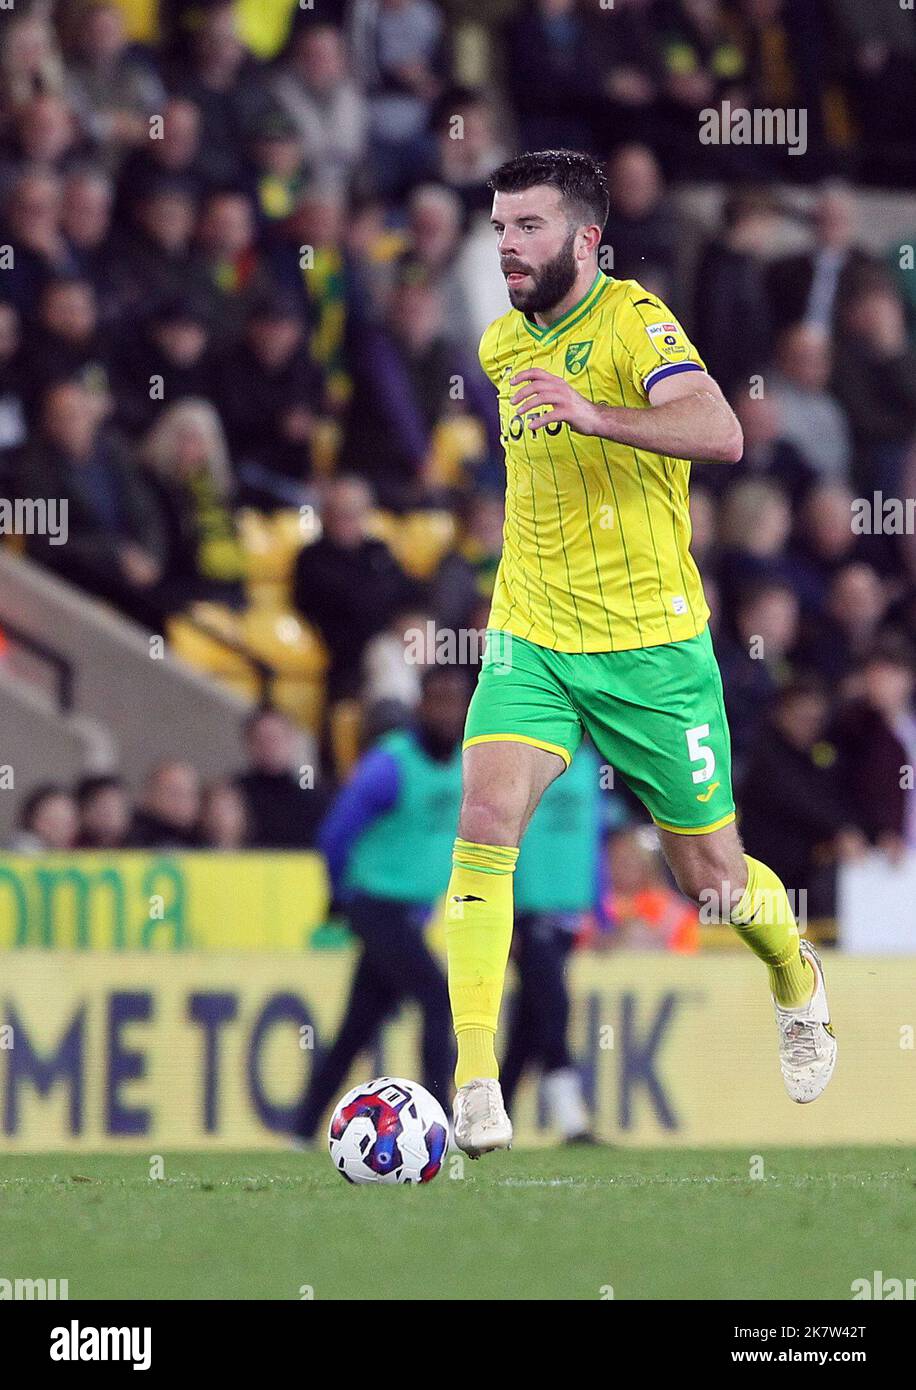 Norwich, UK. 18th Oct, 2022. Grant Hanley of Norwich City runs with the ball during the Sky Bet Championship match between Norwich City and Luton Town at Carrow Road on October 18th 2022 in Norwich, England. (Photo by Mick Kearns/phcimages.com) Credit: PHC Images/Alamy Live News Stock Photo